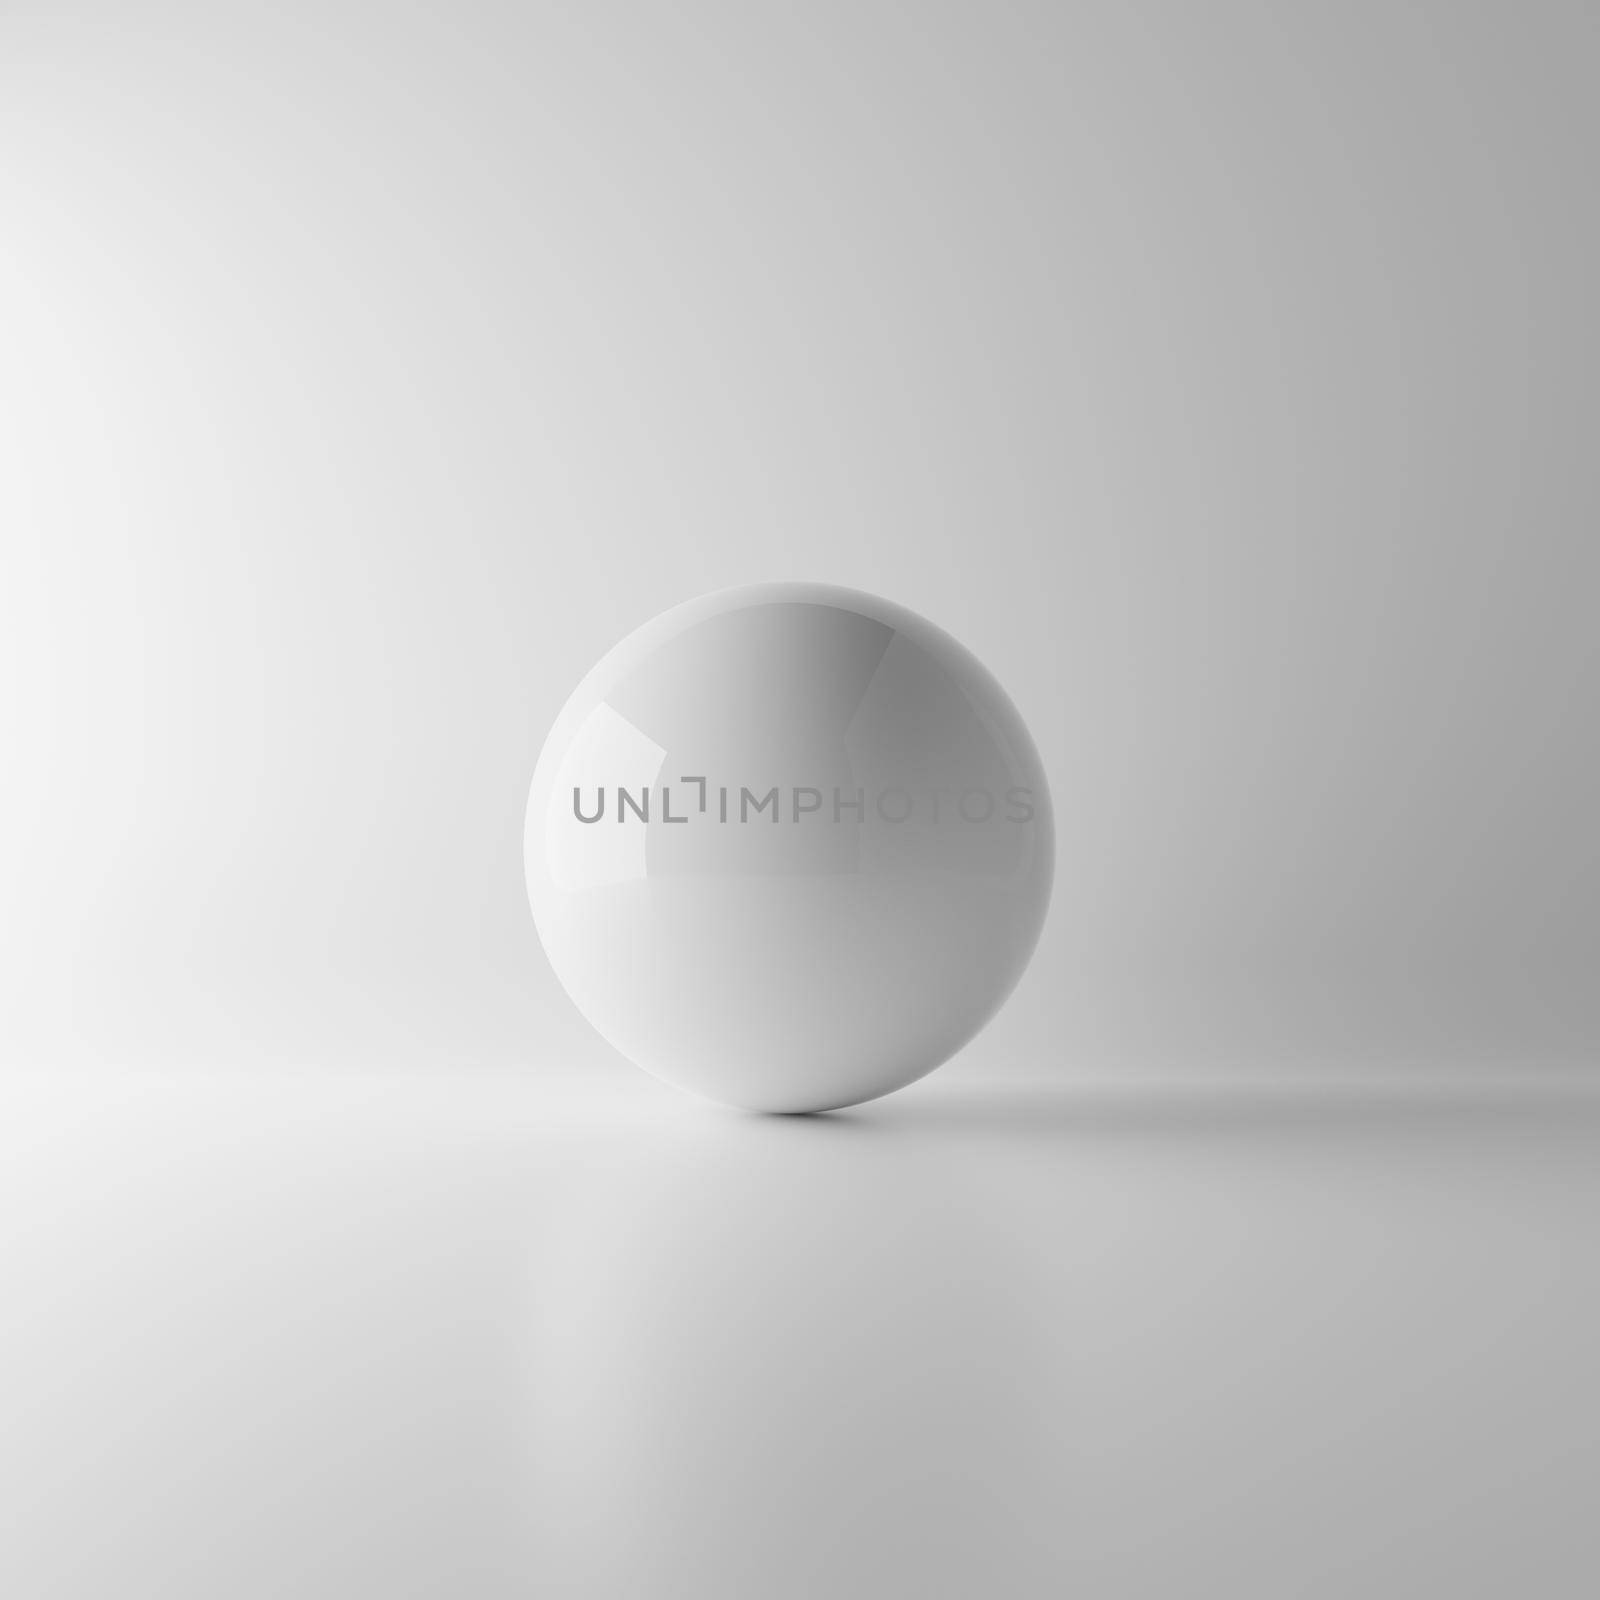 Abstract white reflection sphere ball on white background with lighting and shadow. Realistic mockup concept. Single geometry object. 3D illustration rendering